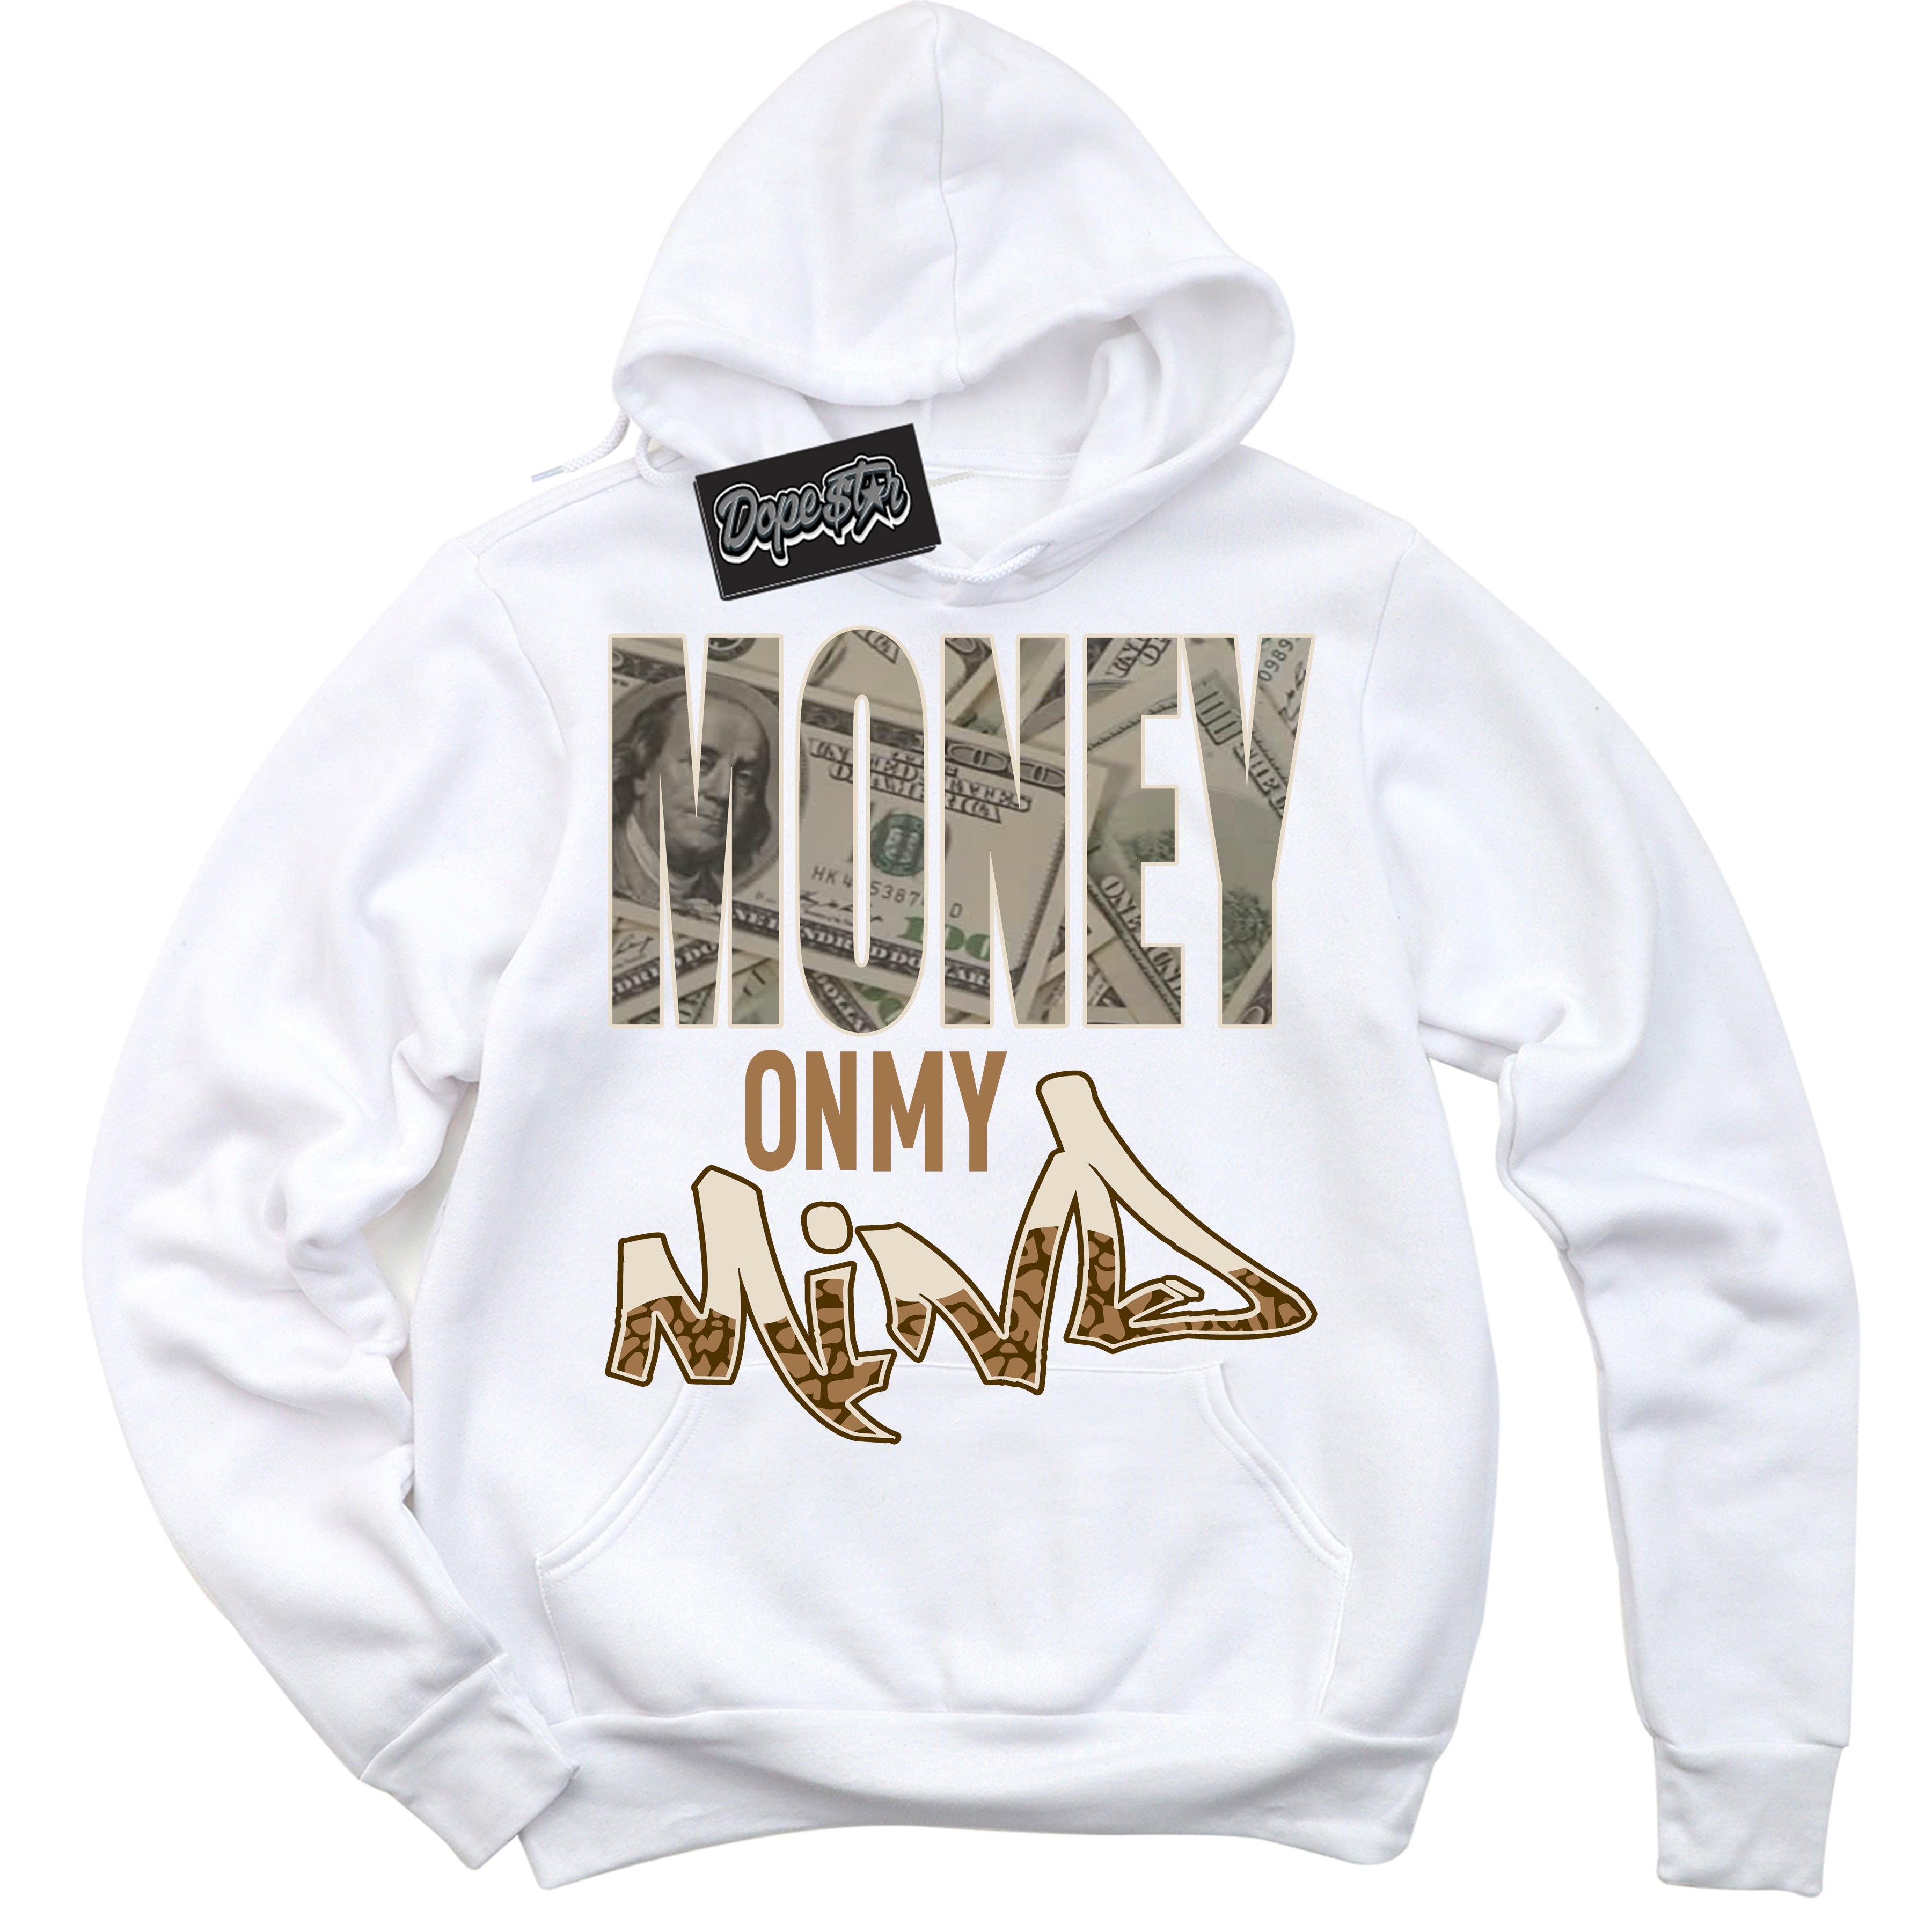 Cool White Graphic DopeStar Hoodie with “ Money On My Mind “ print, that perfectly matches Palomino 3s sneakers